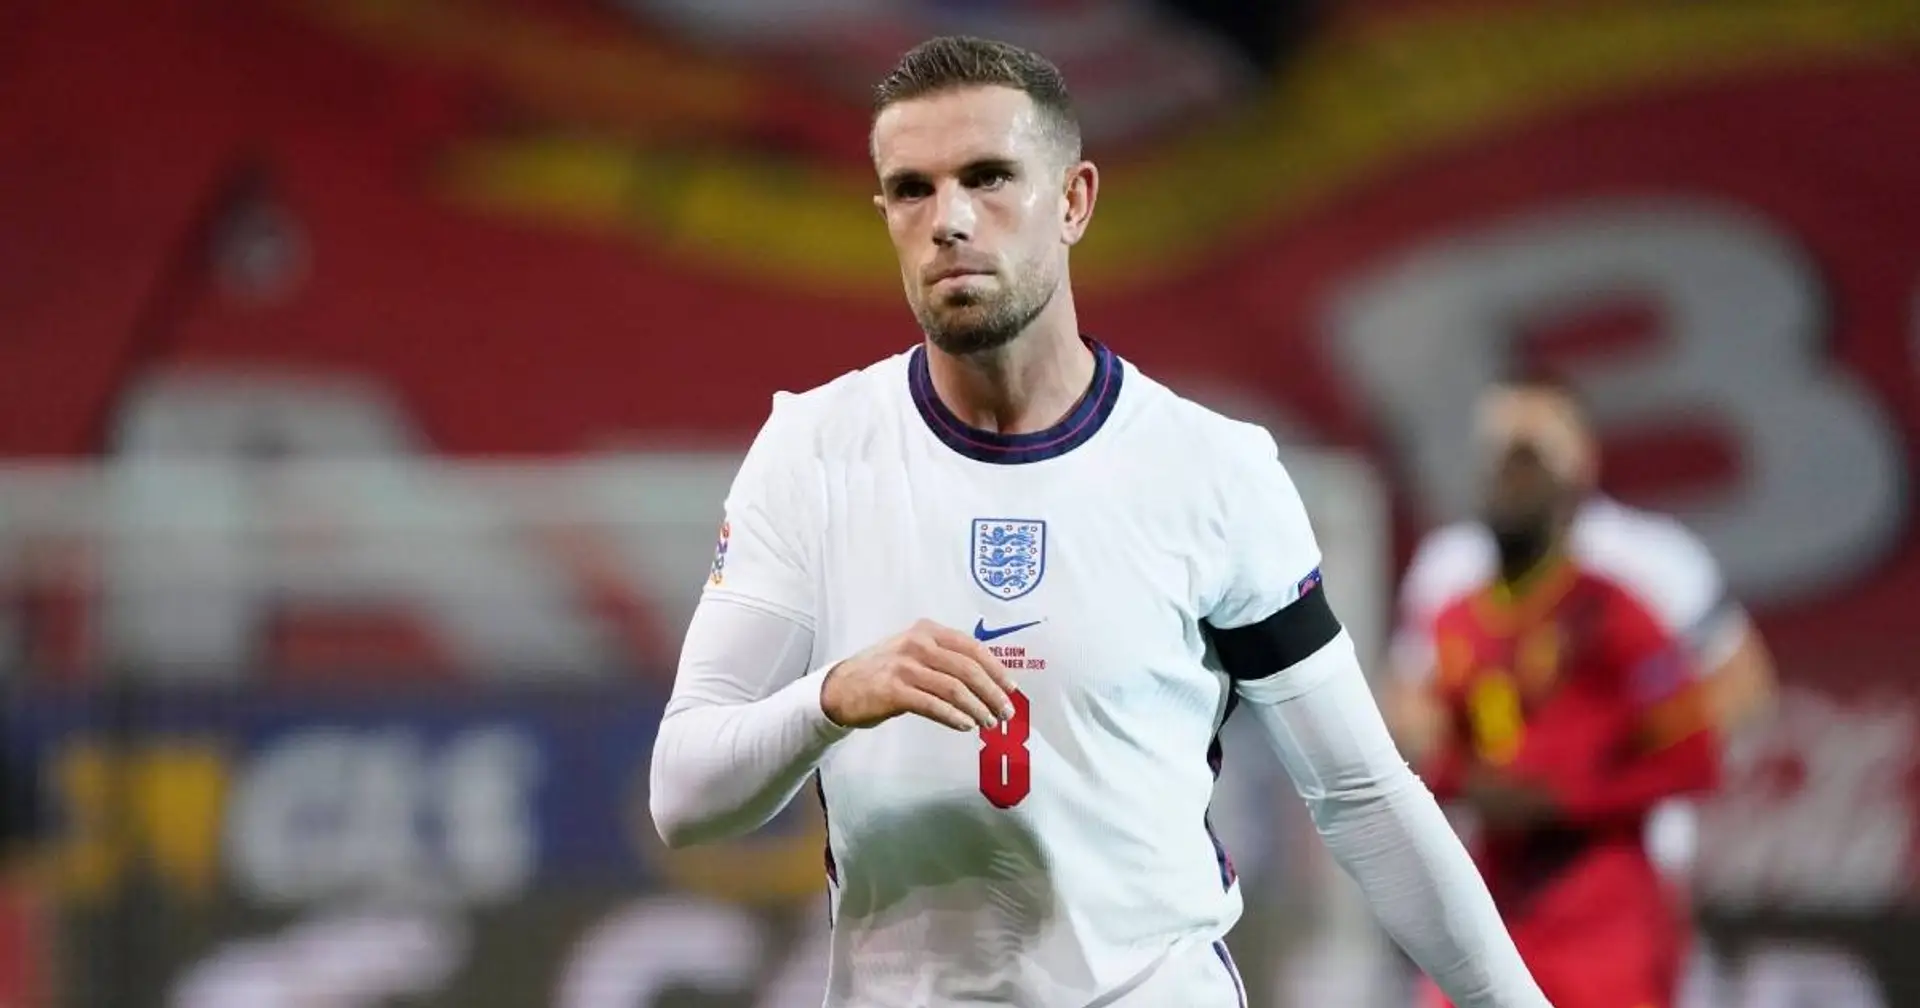 Henderson gets England call-up and 2 more big stories you may have missed